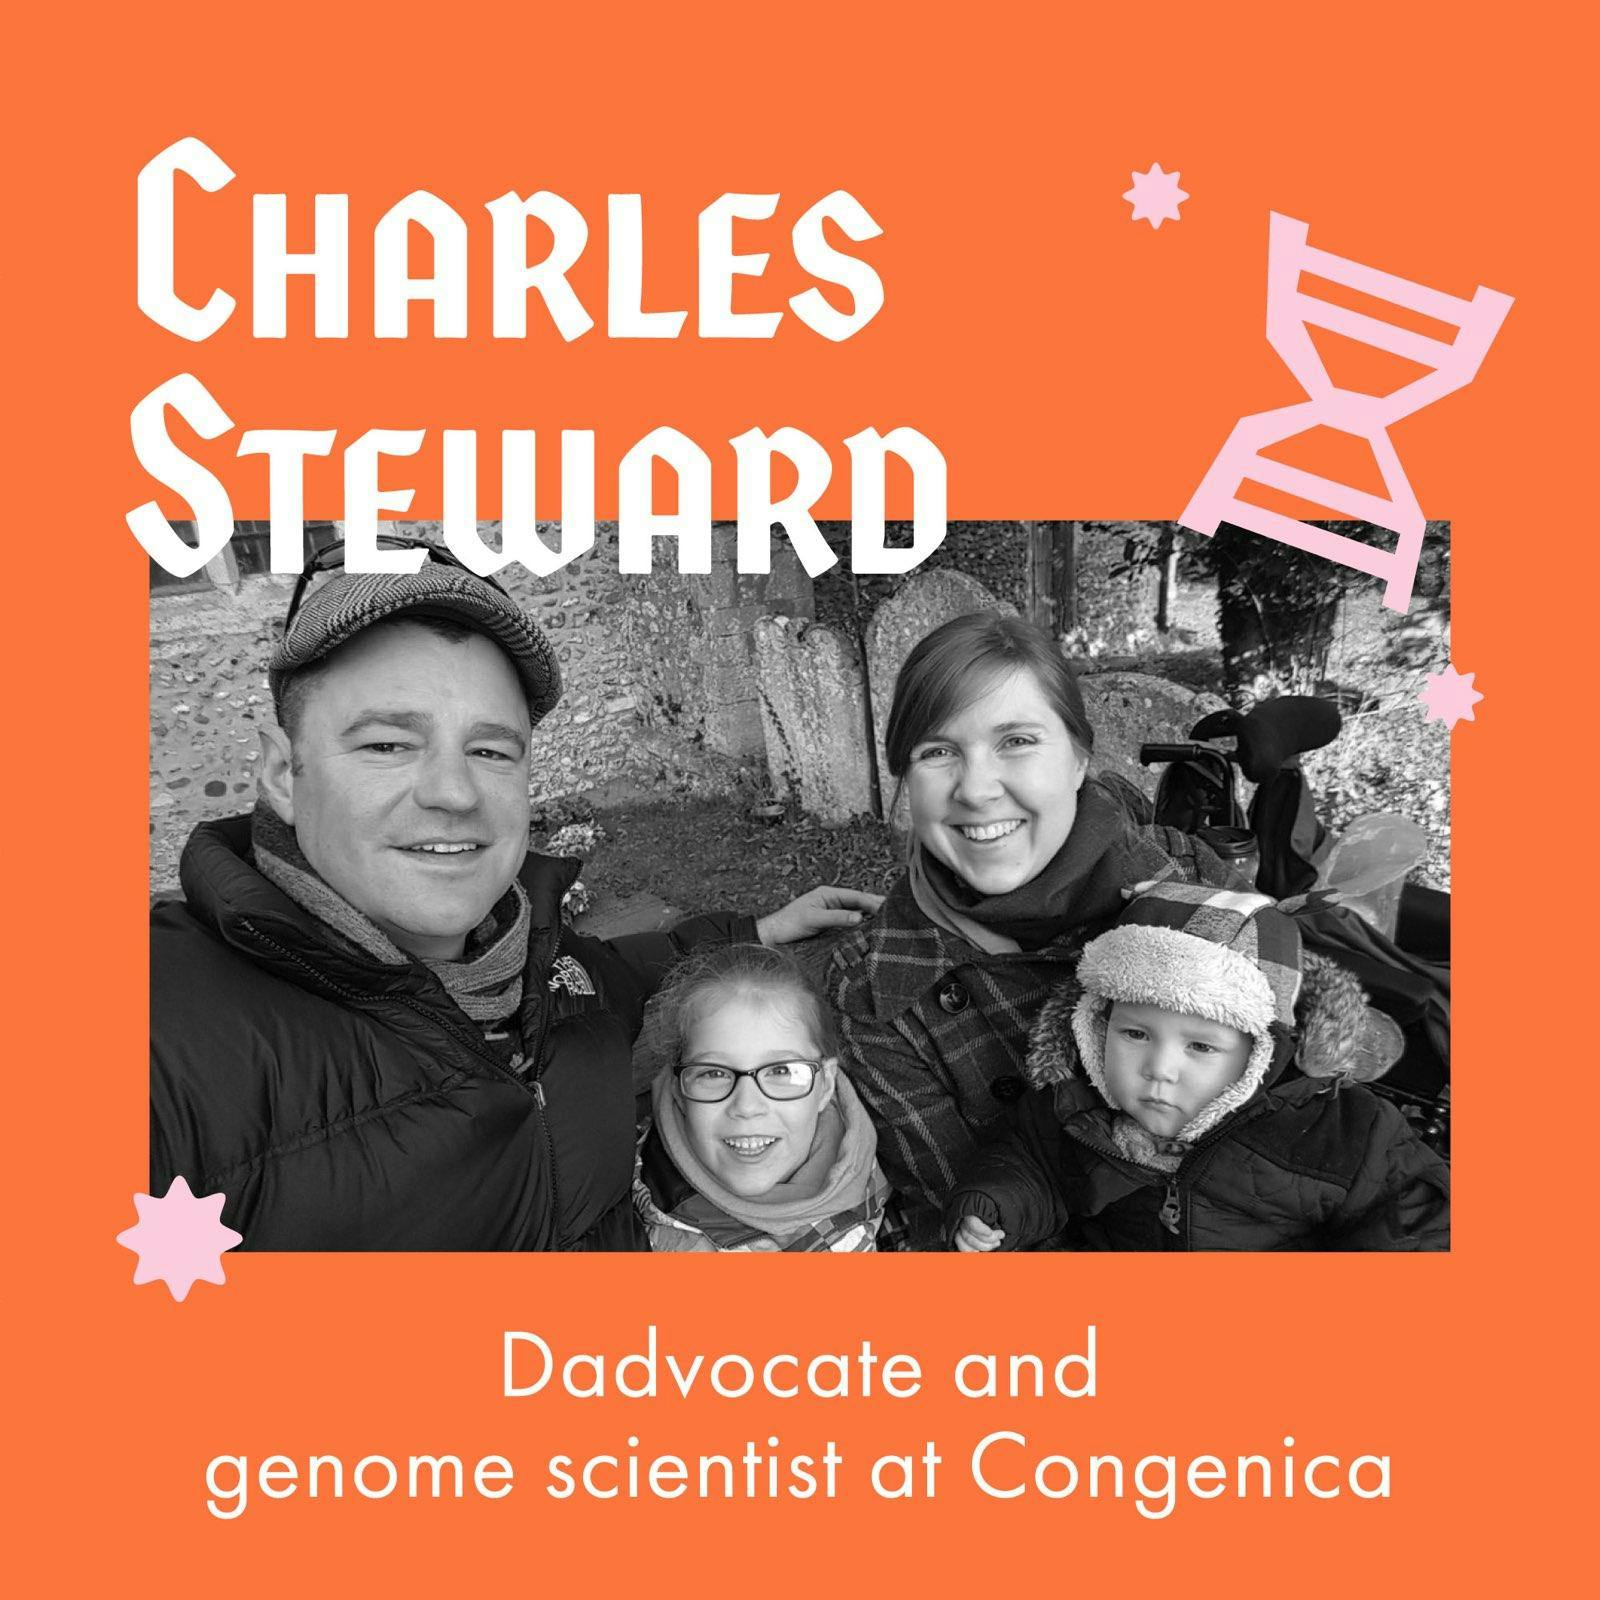 Helping to Further the Patient Impact of Genomics with DadVocate and Genome Scientist at Congenica – Charles Steward